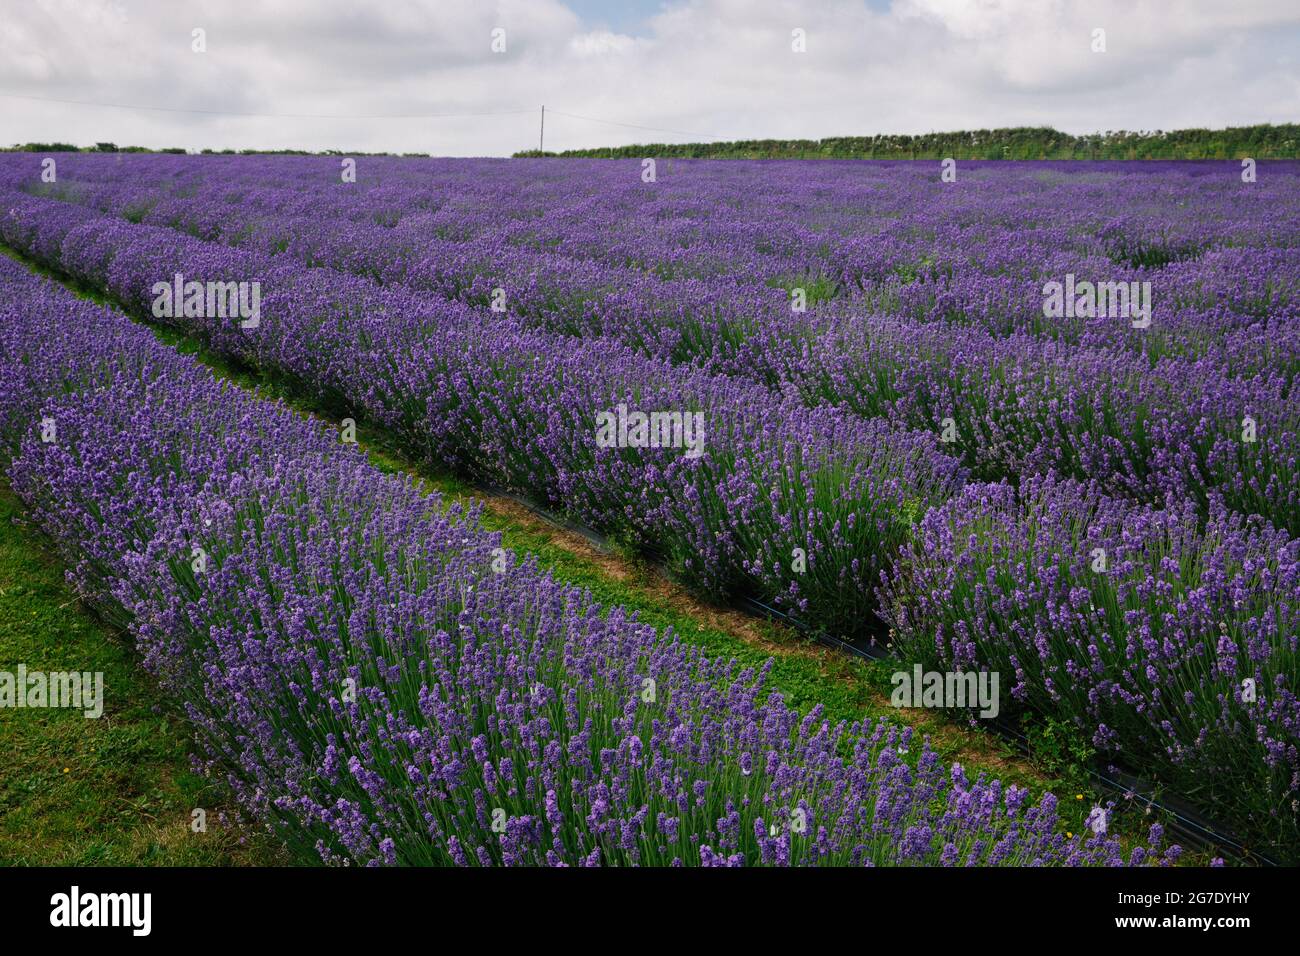 Rows of farmed lavender flowers on a Lavender farm Stock Photo